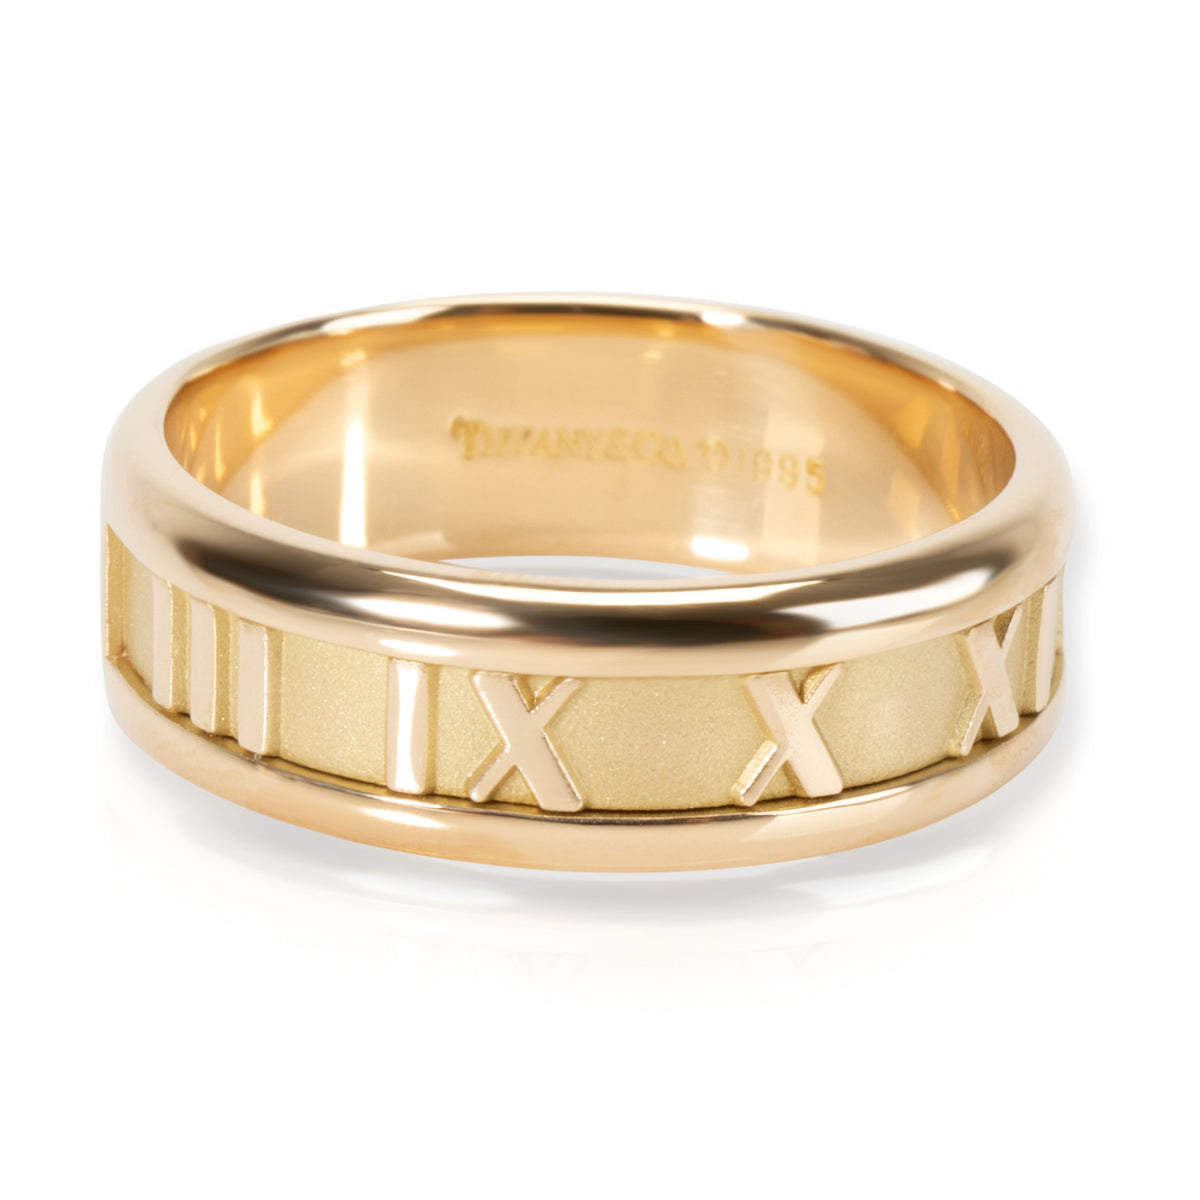 Tiffany & Co. Atlas Band in 18K Yellow Gold